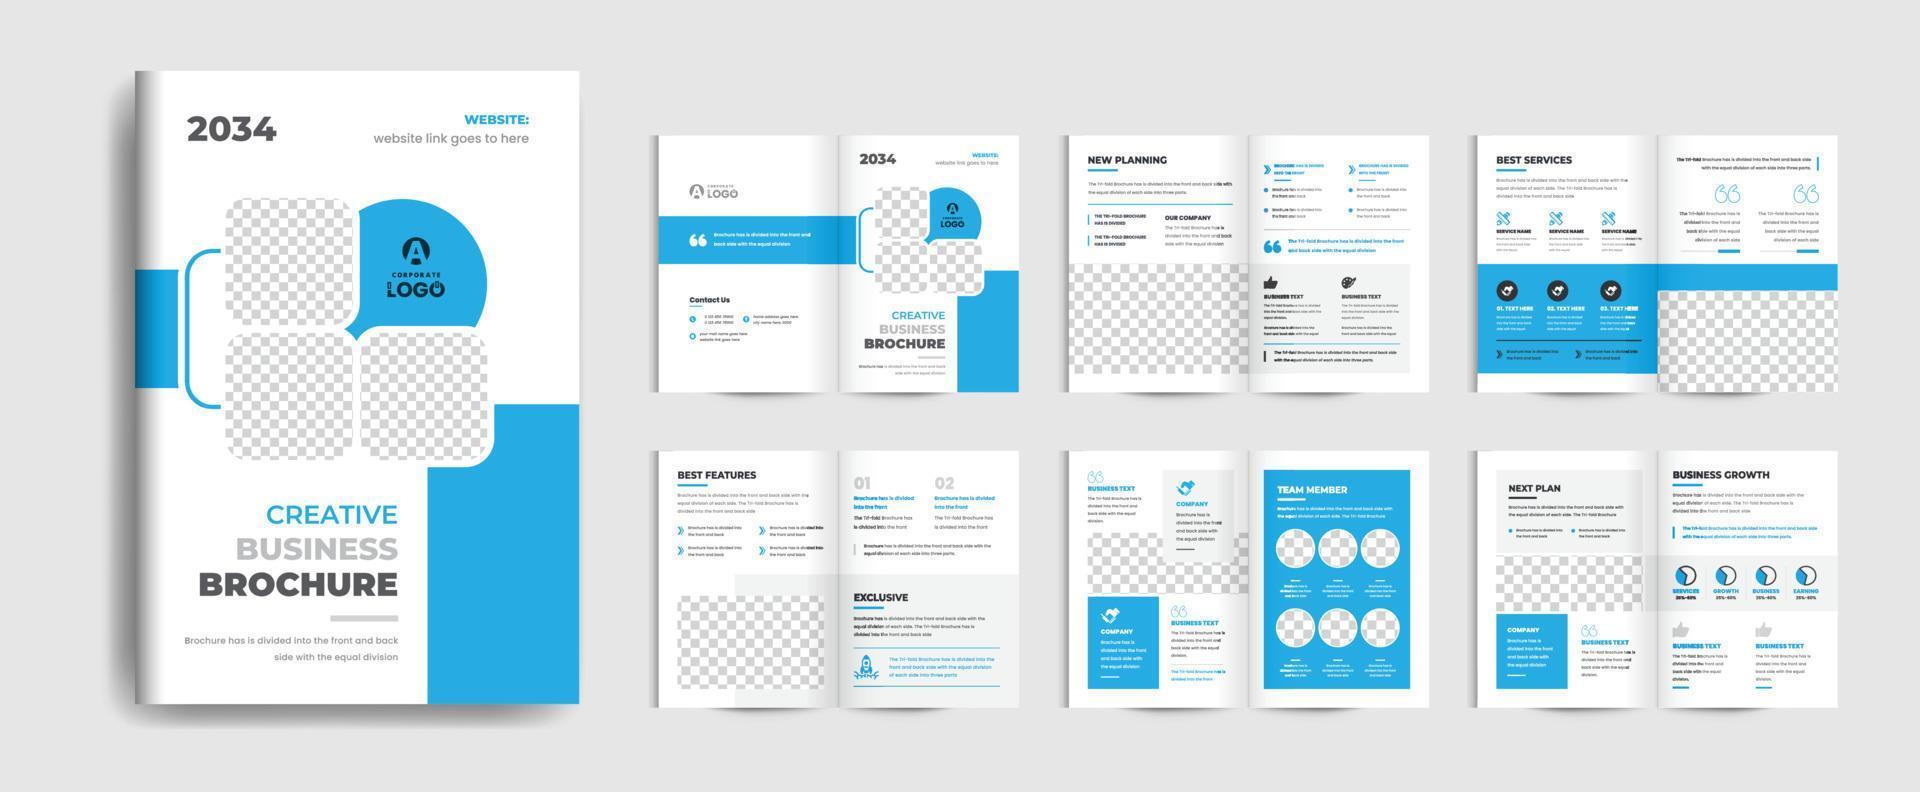 16 pages business brochure design template vector